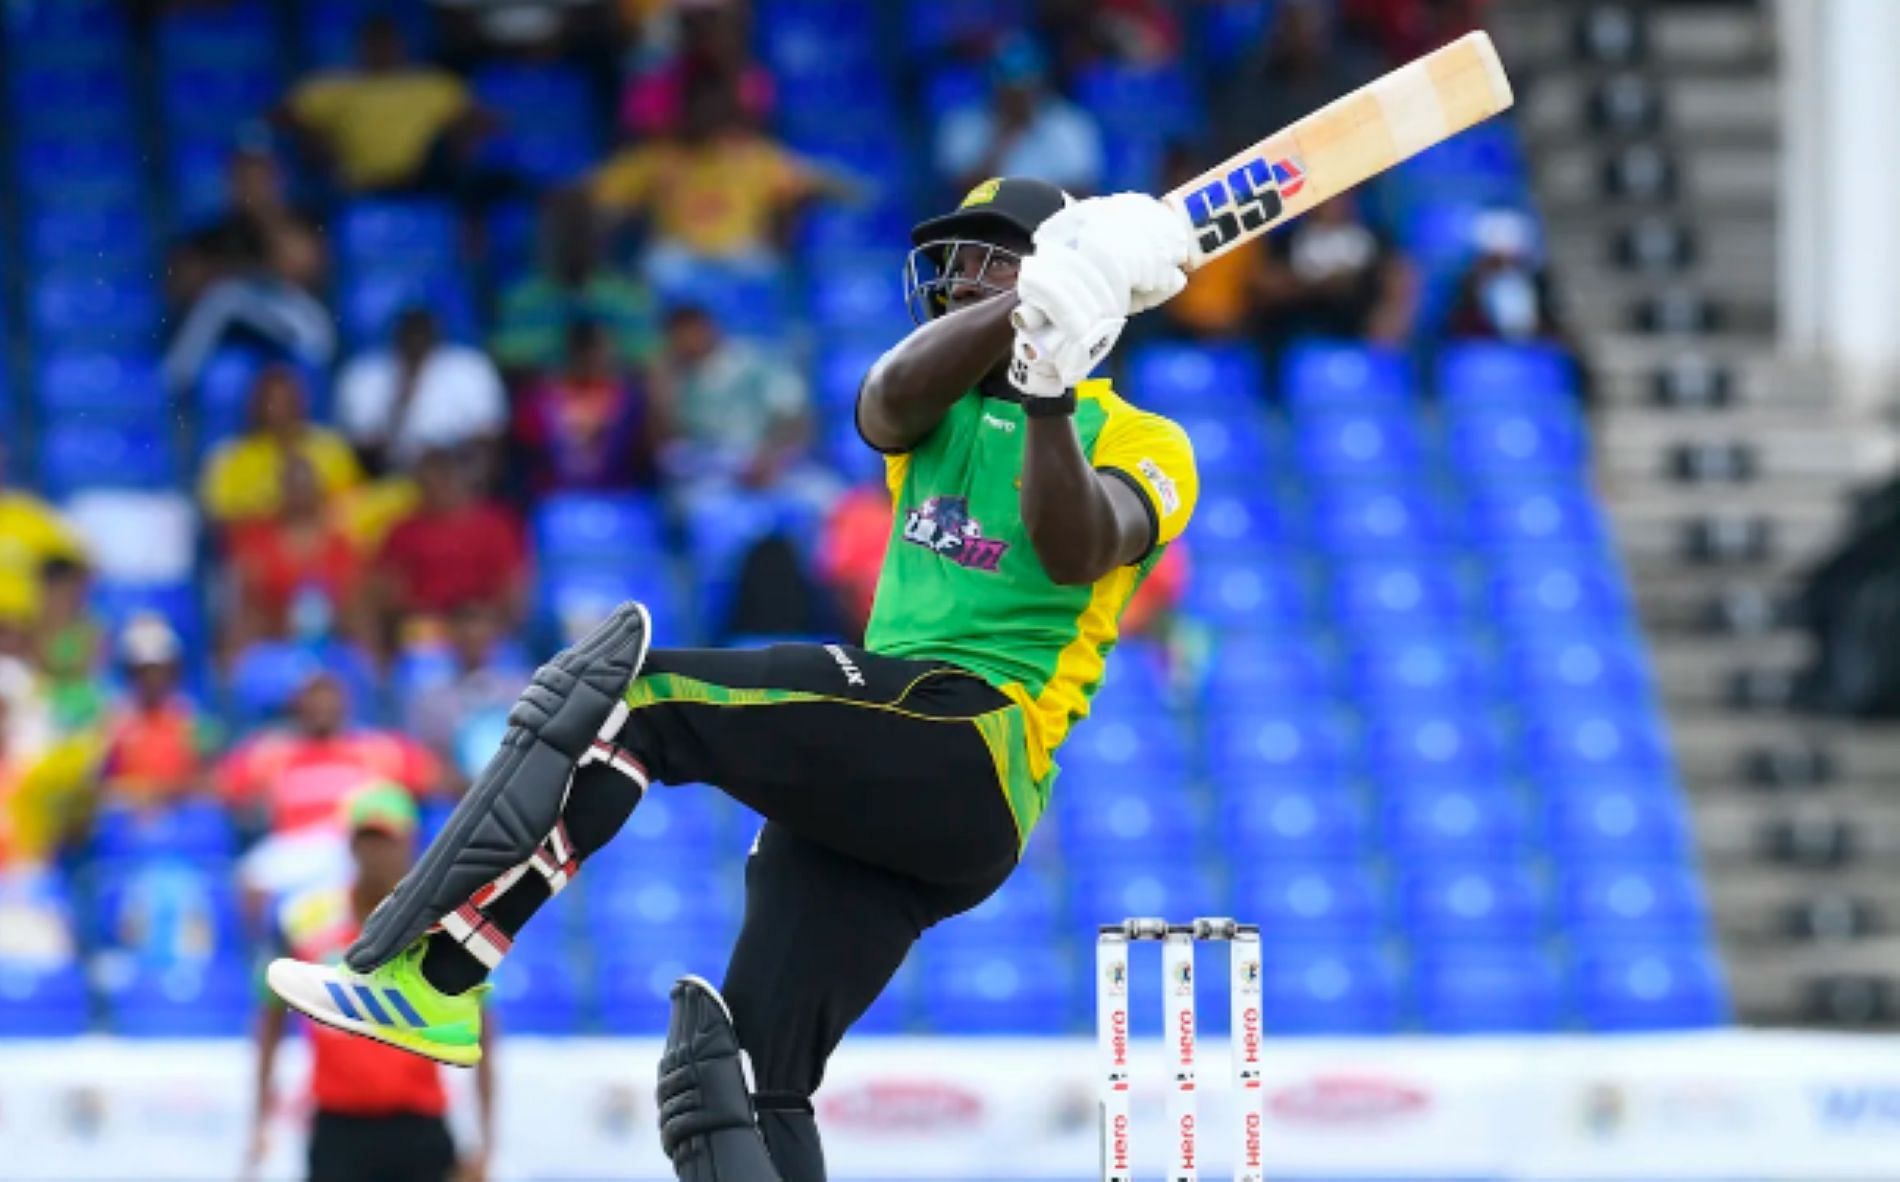 Powell has been an integral part of the Tallawahs franchise over the years.